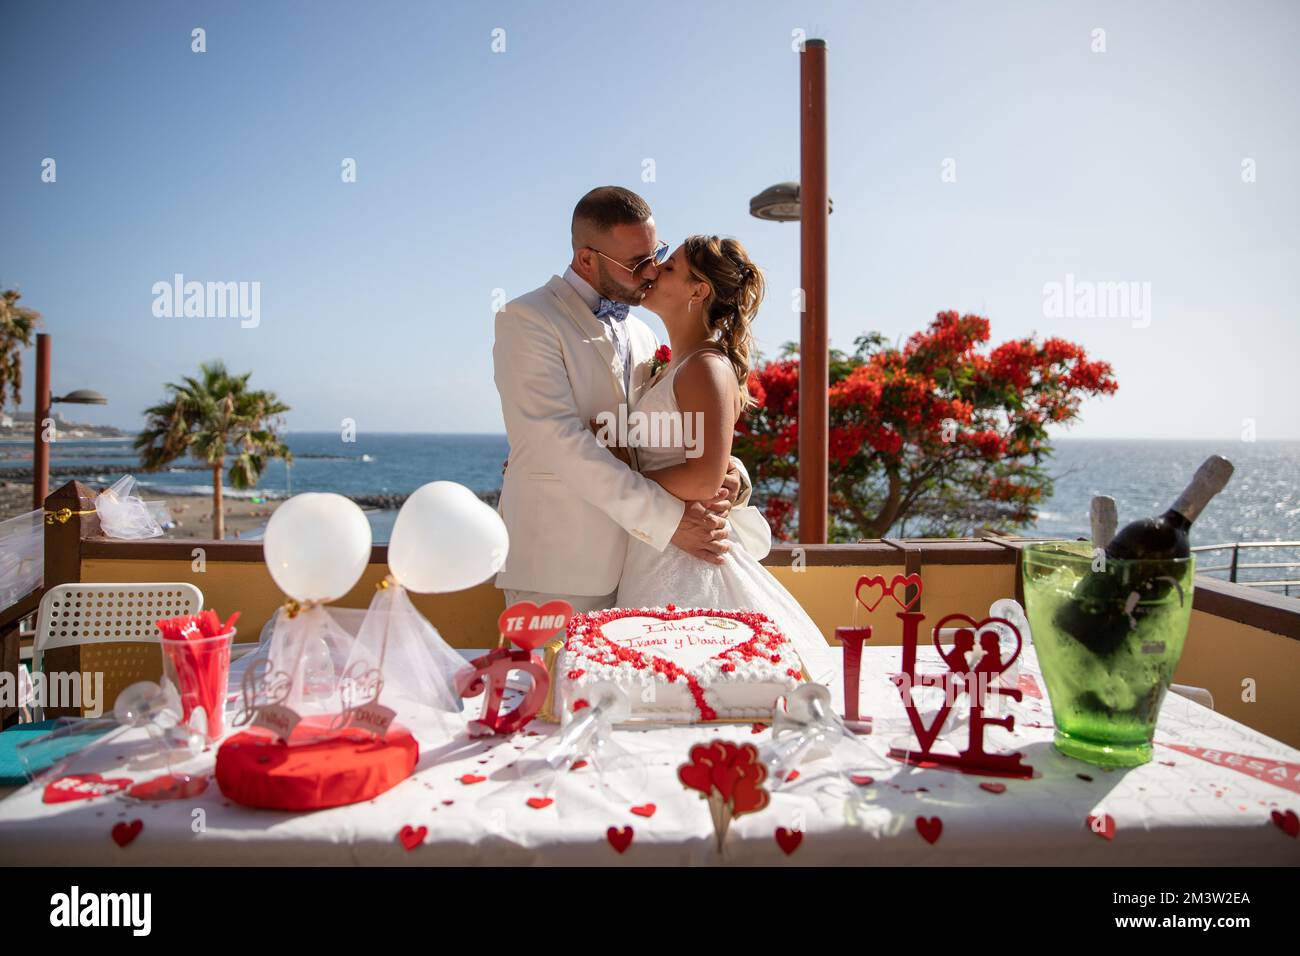 Newlyweds couple kisses in front of the wedding cake, passionate moment Stock Photo